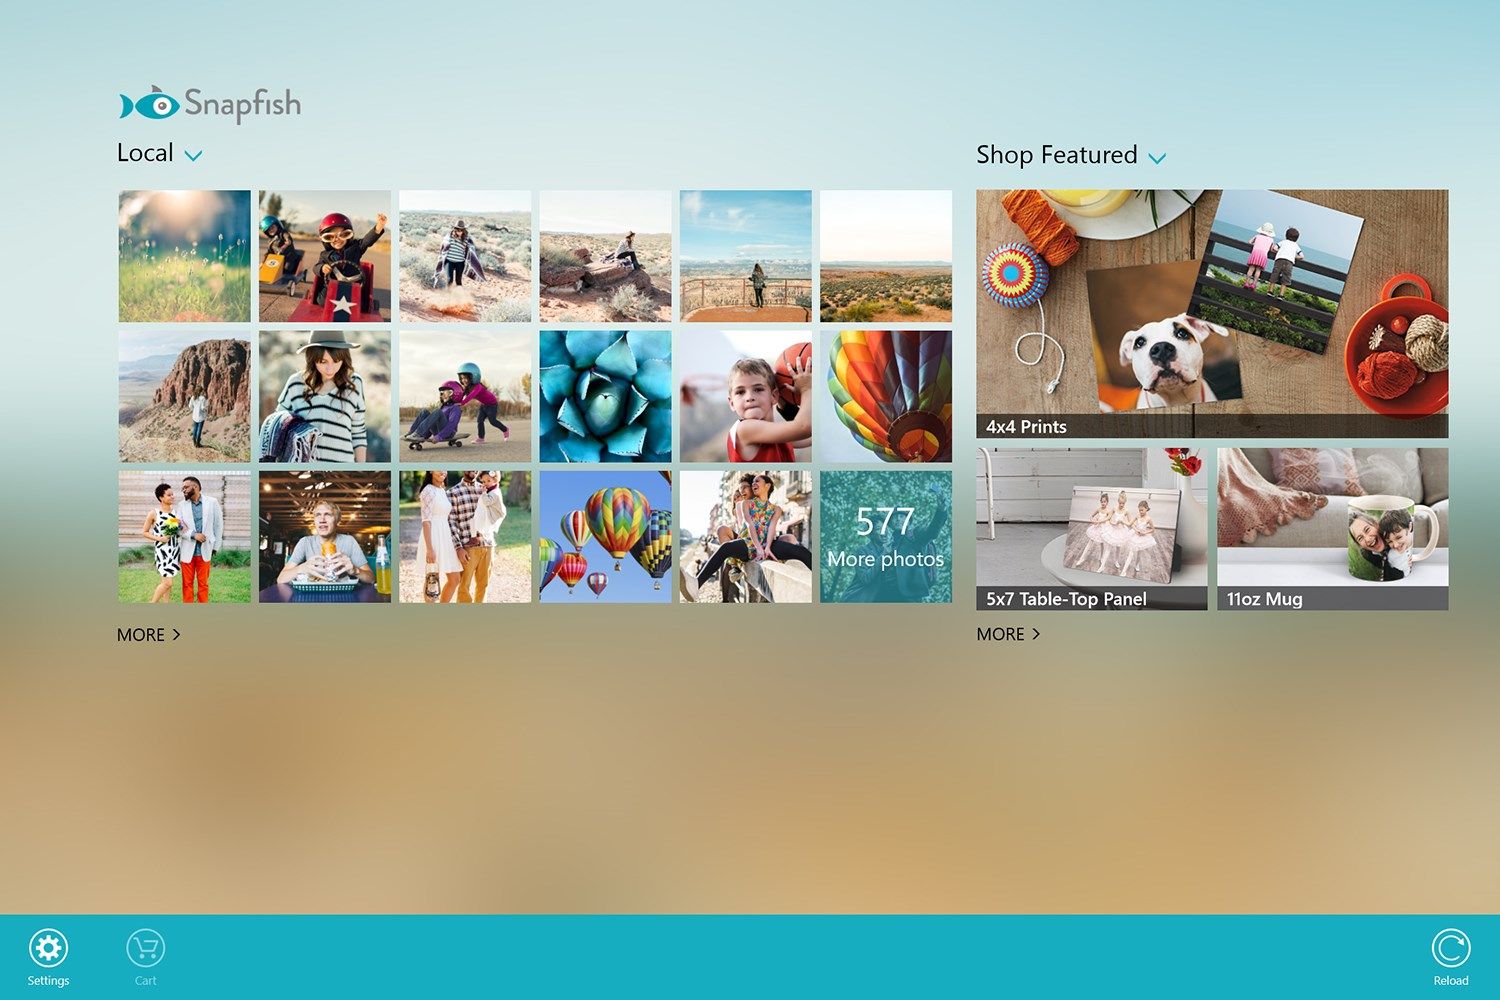 Snapfish makes it easy to view your photos wherever they are on any device.